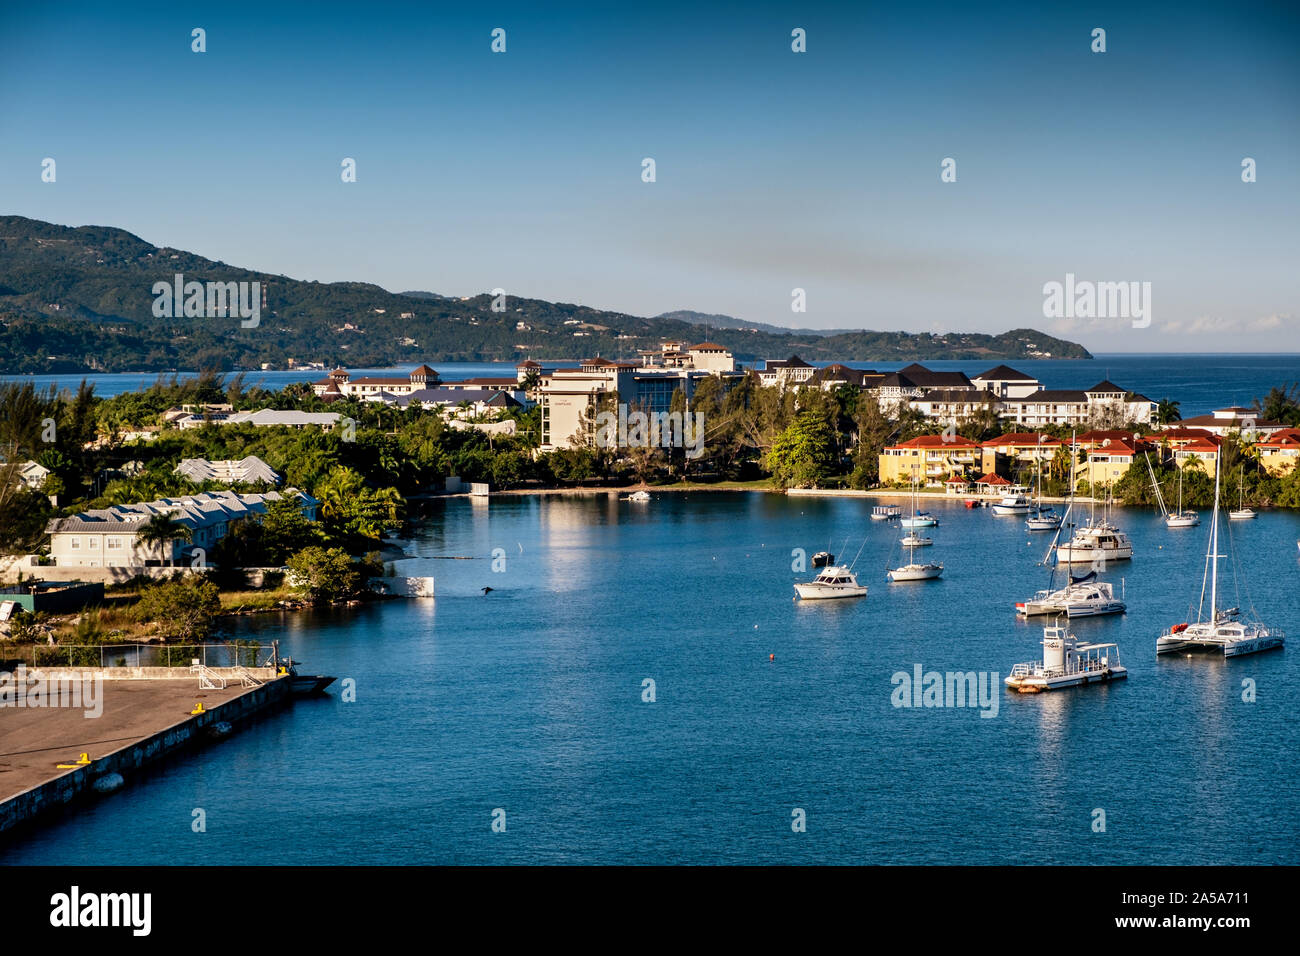 View from cruise ship of Montego Bay cruise port, Jamaica, Caribbean Stock Photo